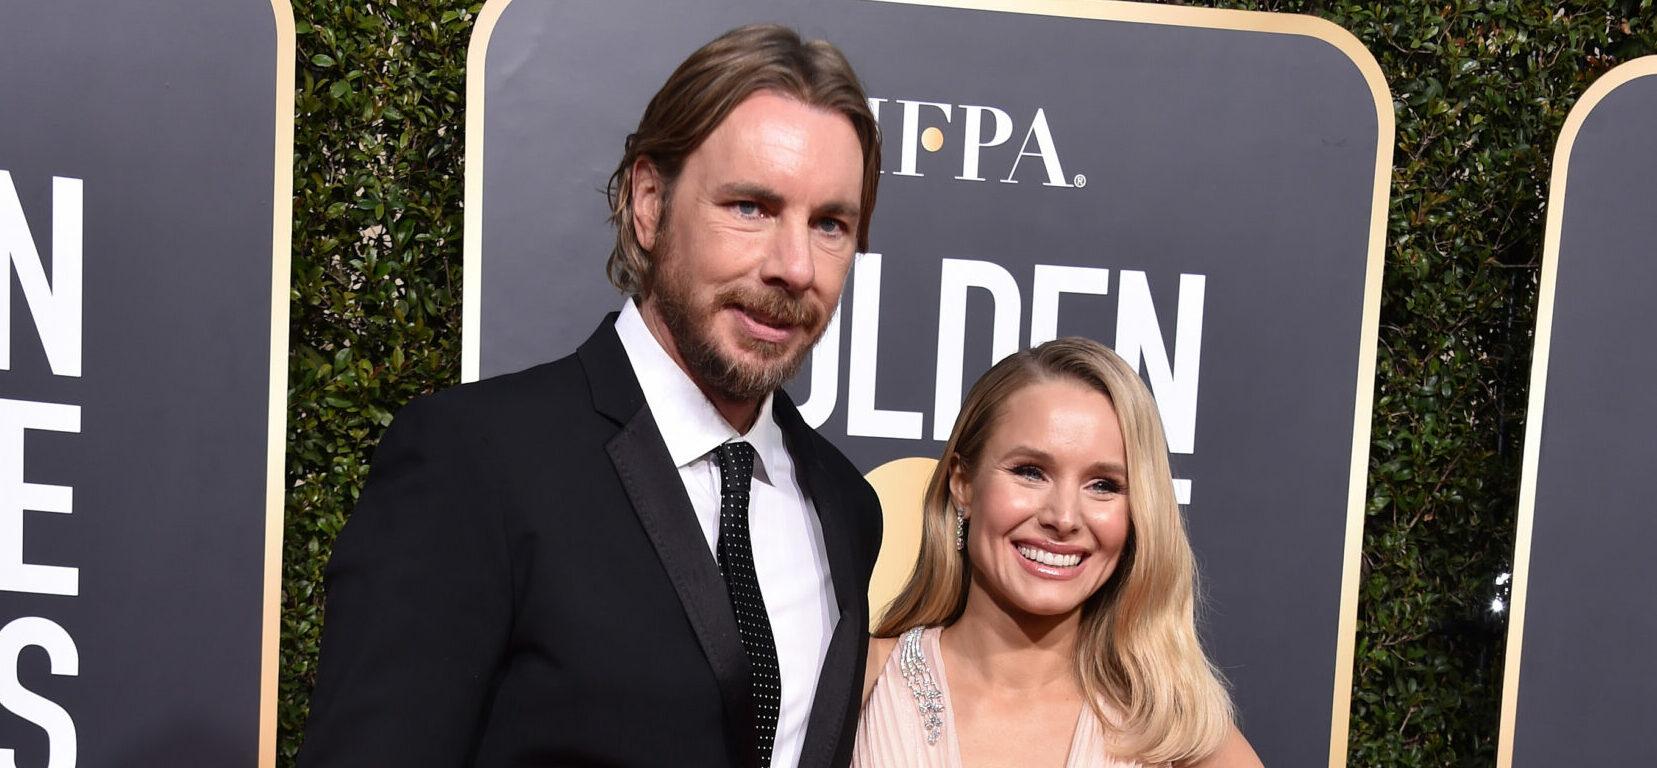 Dax Shepard Defends Kristen Bell Amid Backlash From Allowing Kids Have Non-Alcoholic Beer: ‘Not Your Business’